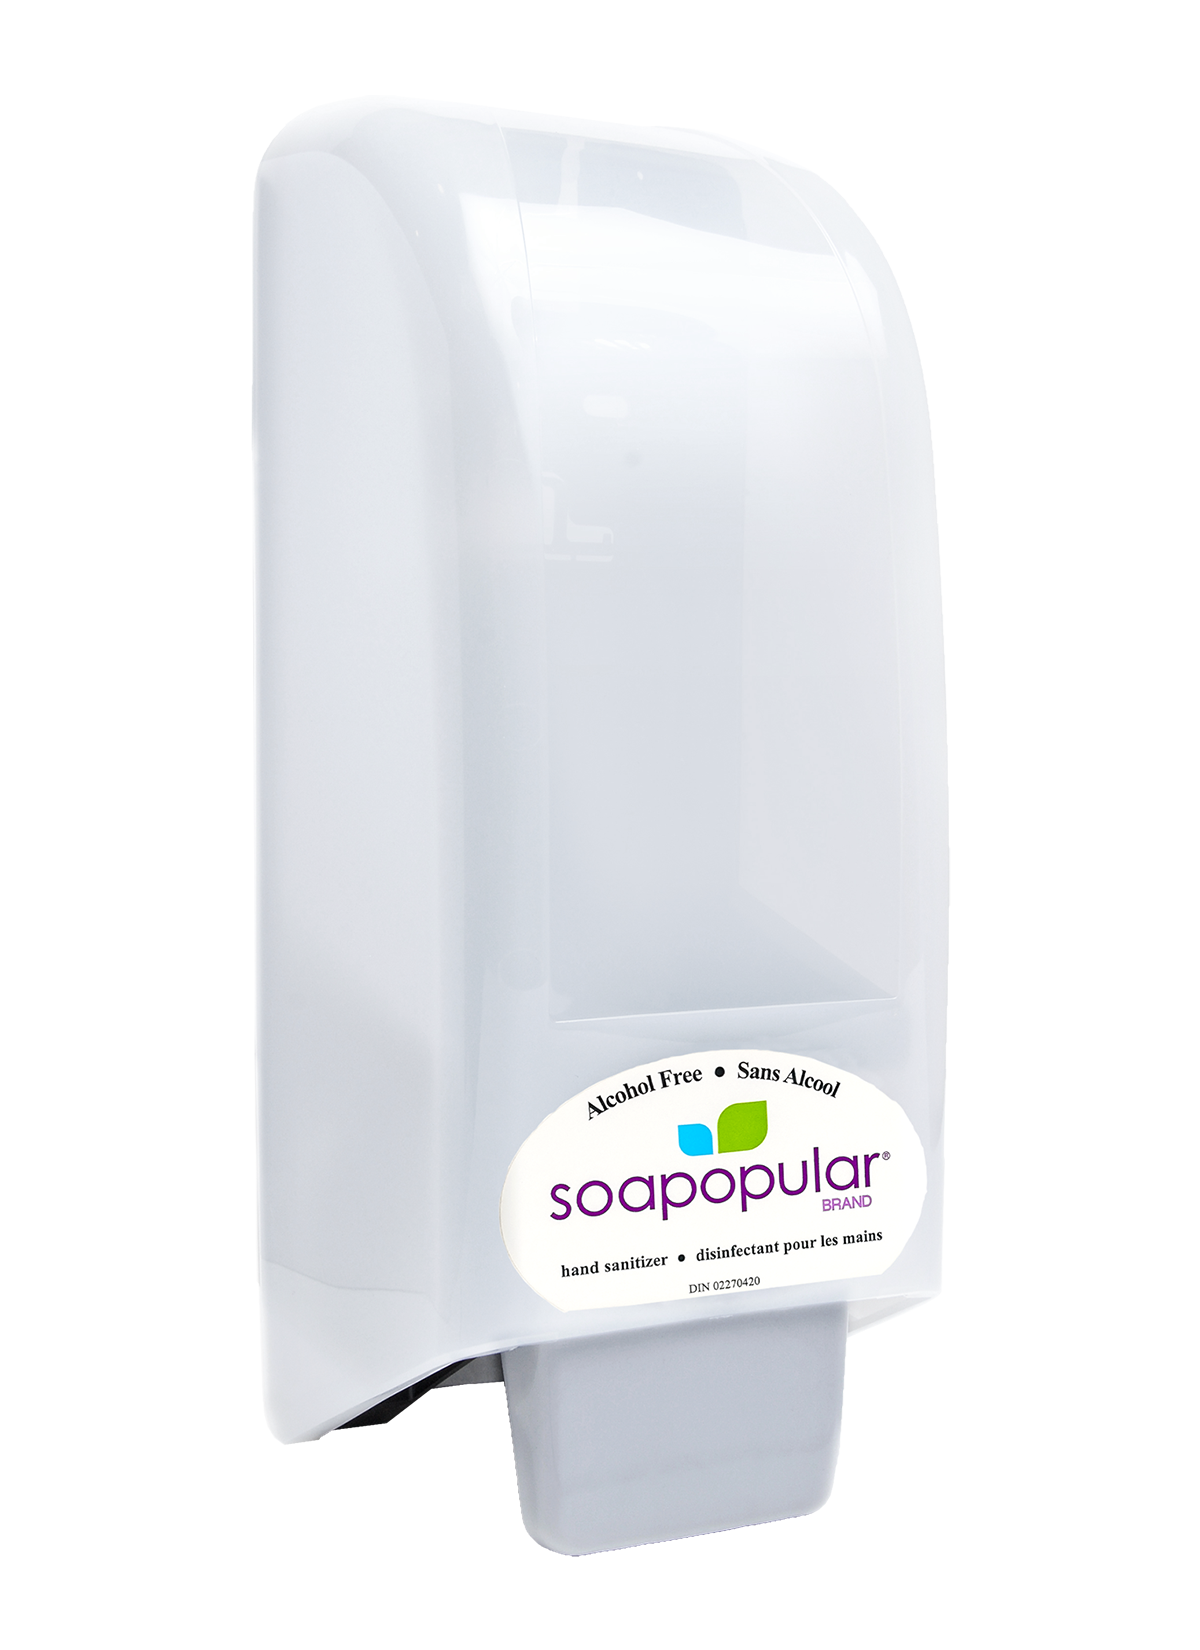 PROMOTION* Soapopular® DIN Alcohol-Free Foam Hand Sanitizer 1 L Cartridge Refill (6PK)  &  Receive 1 FREE  Wall Covered Dispenser